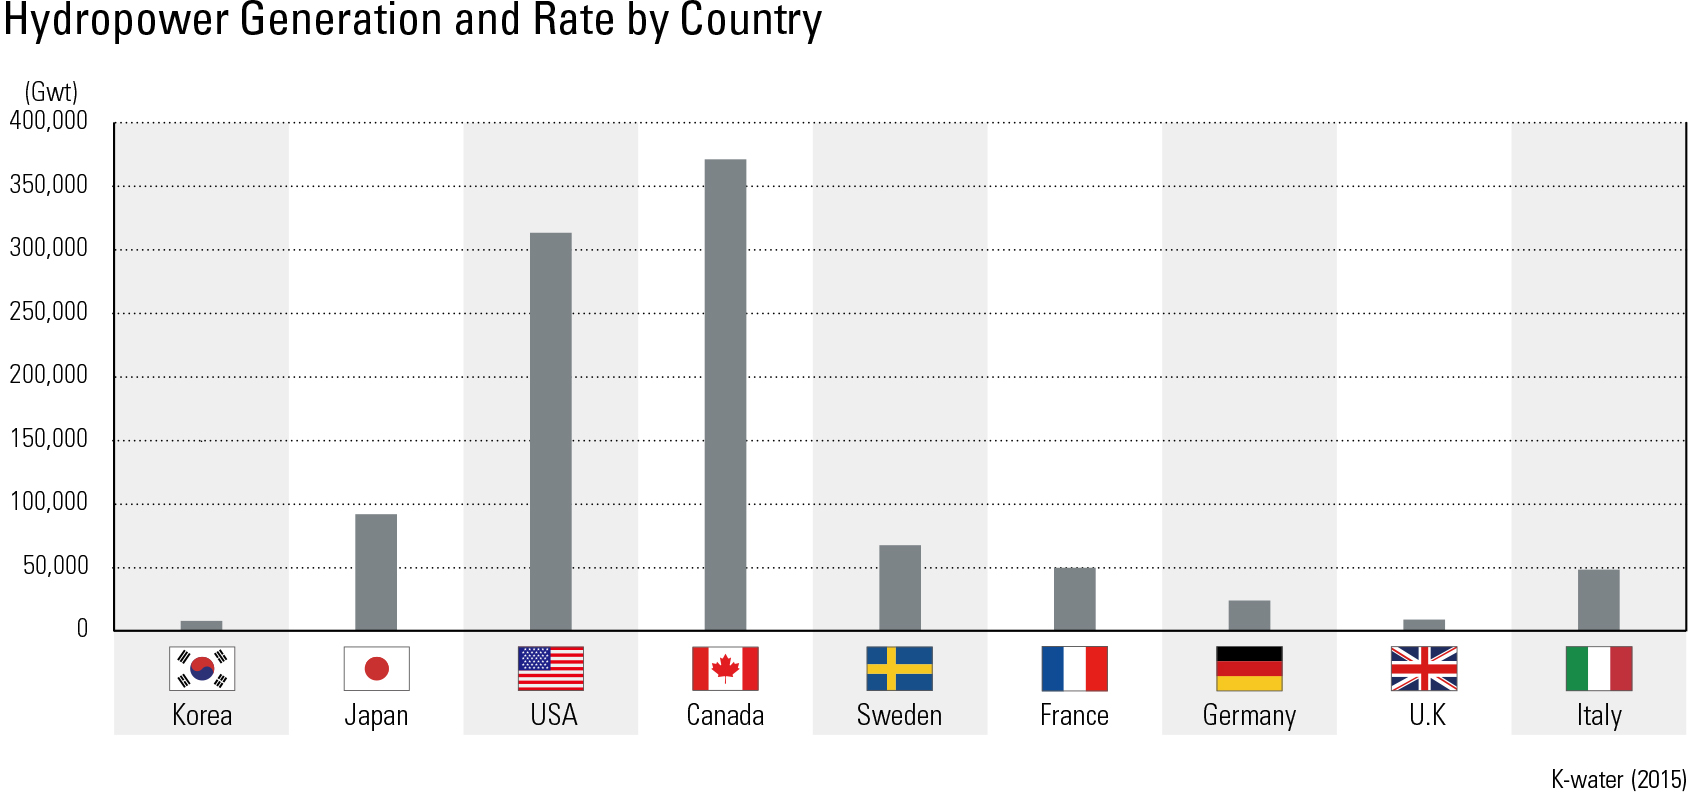 Hydropower Generation and Rate by Country